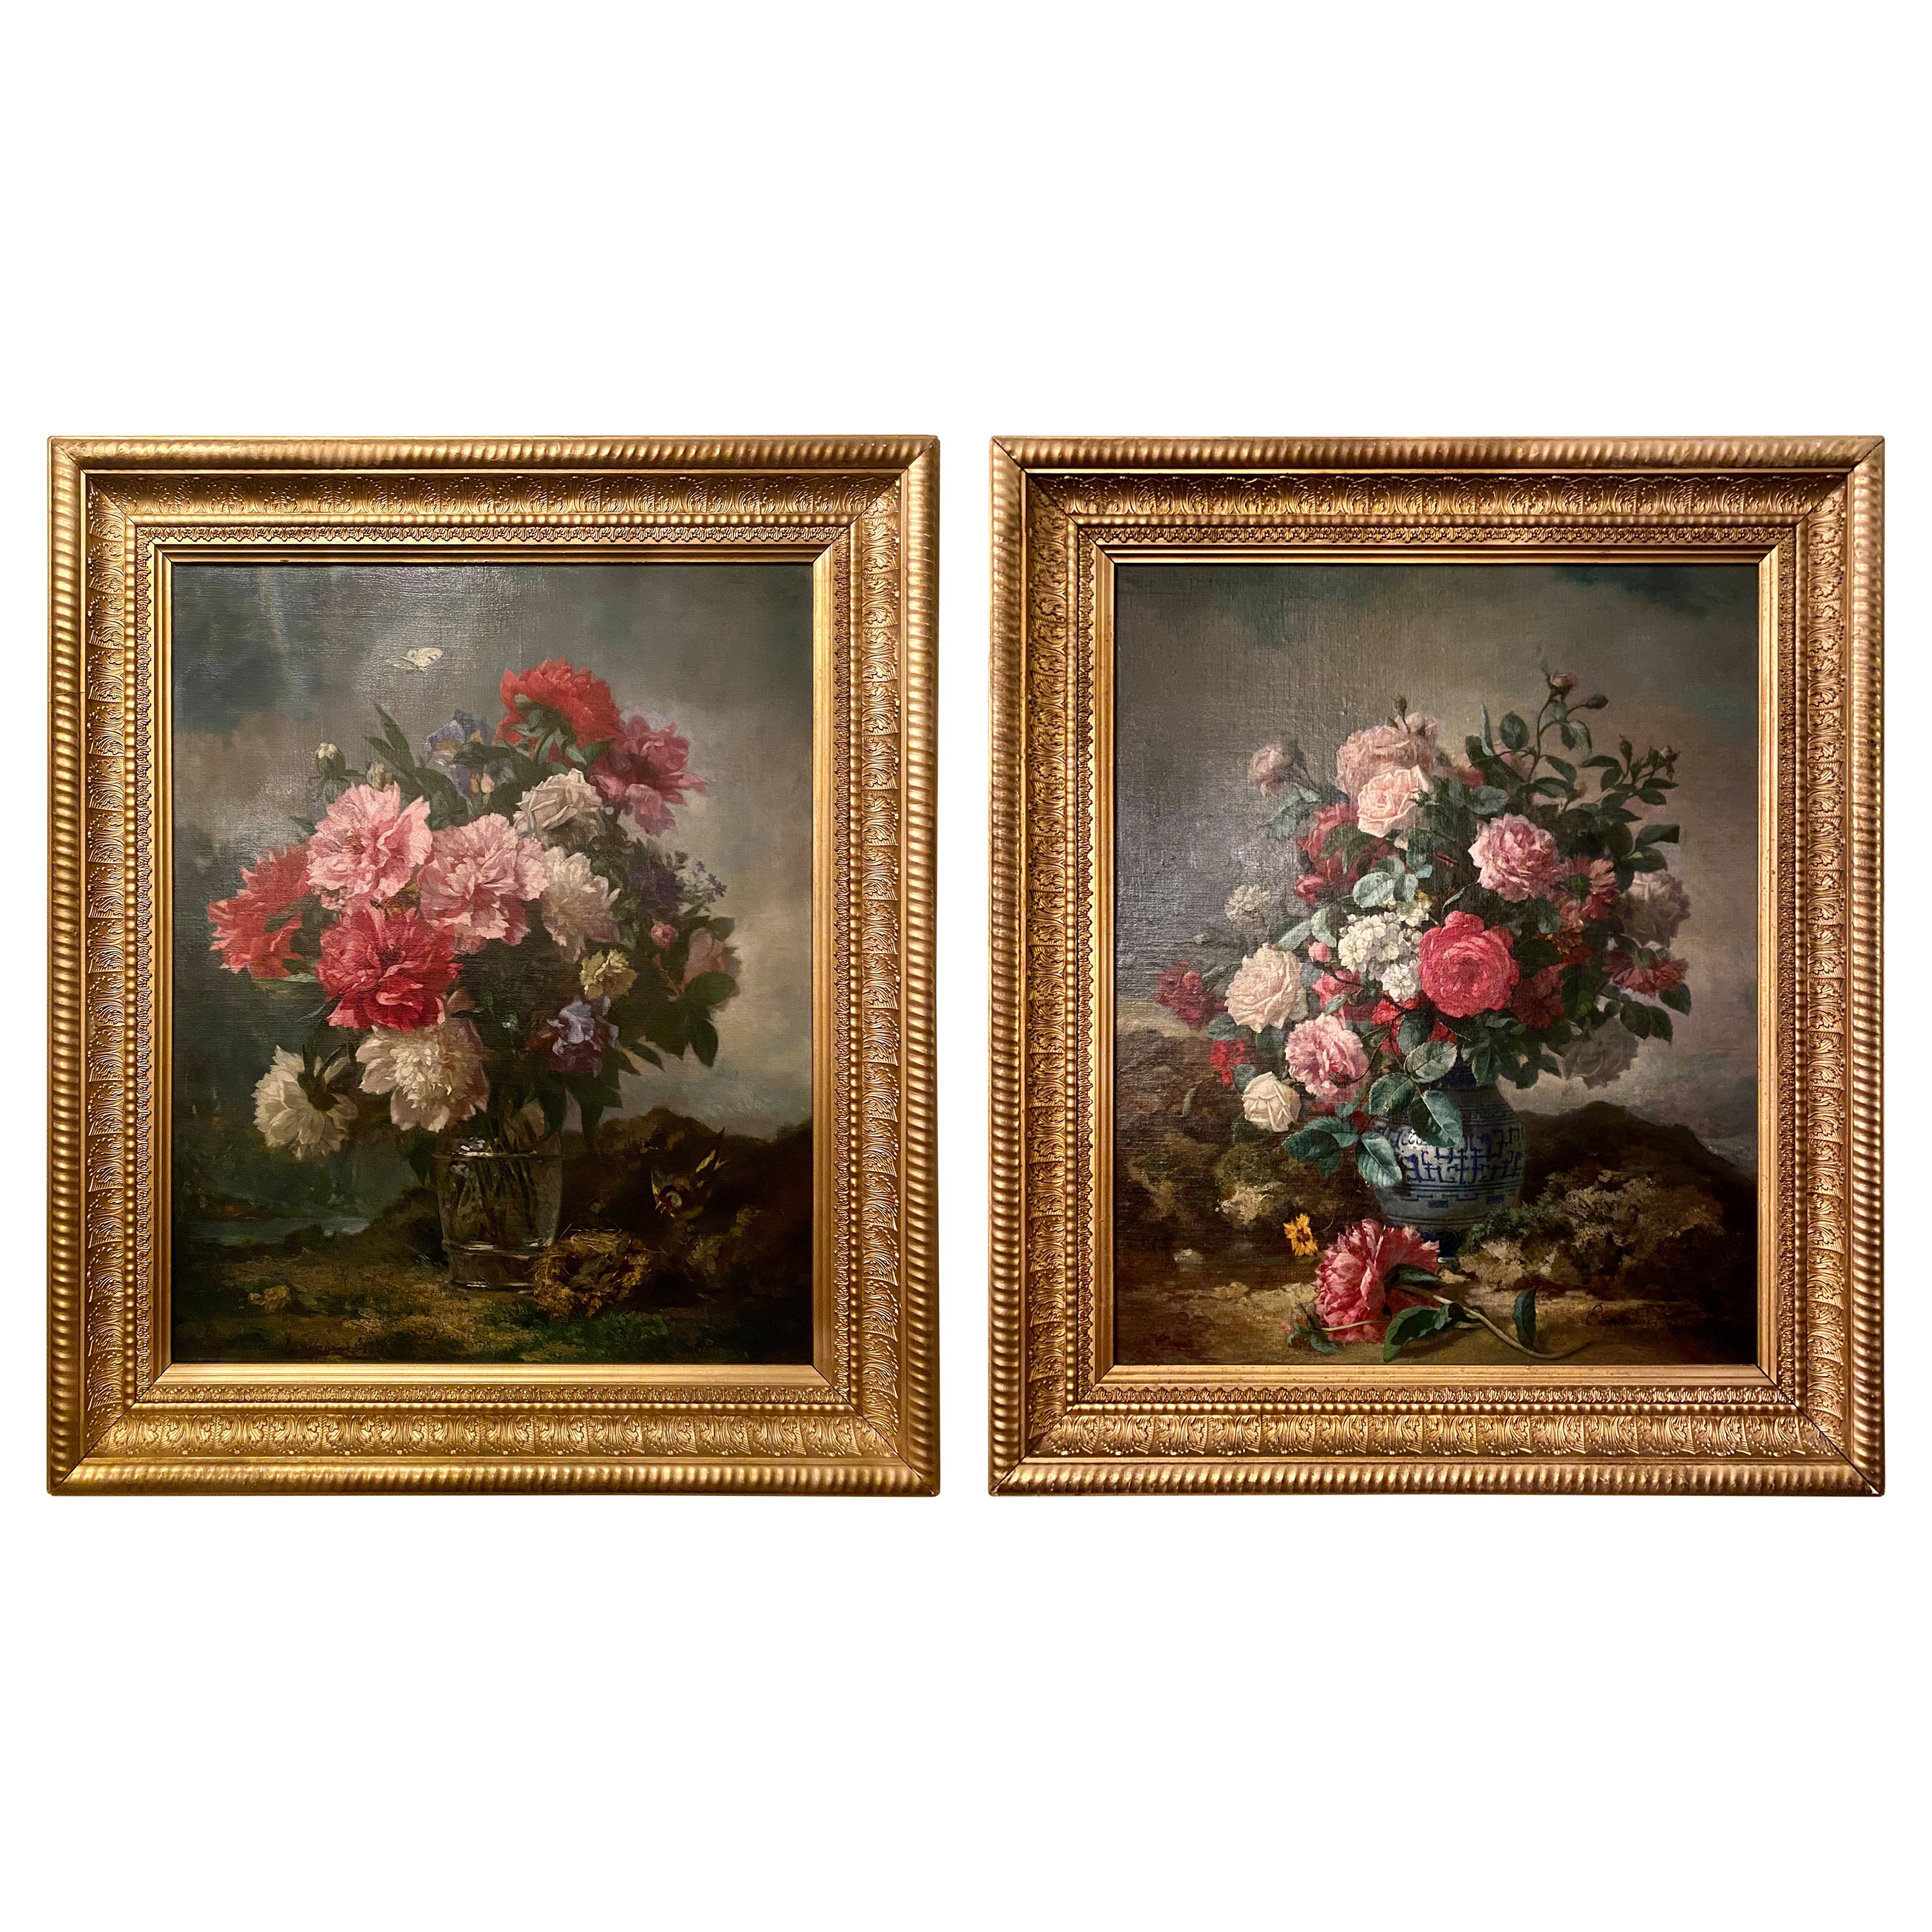 Pair Antique 19th Century E.C. Muraton Floral Still-Life Oil on Canvas Paintings